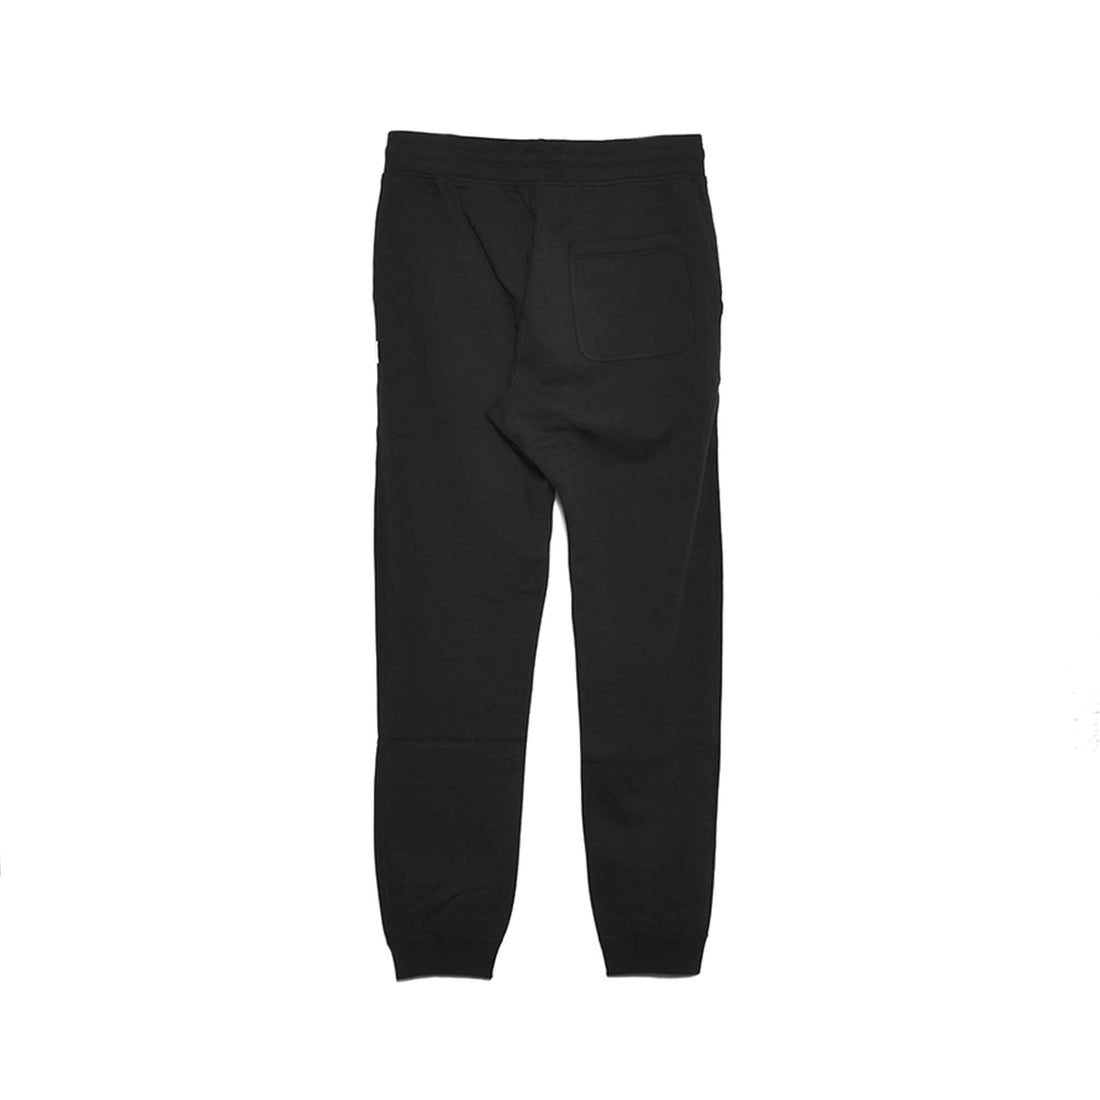 [REIGNING CHAMP]MIDWEIGHT TERRY SLIM SWEATPANT/BLACK(RC-5075)